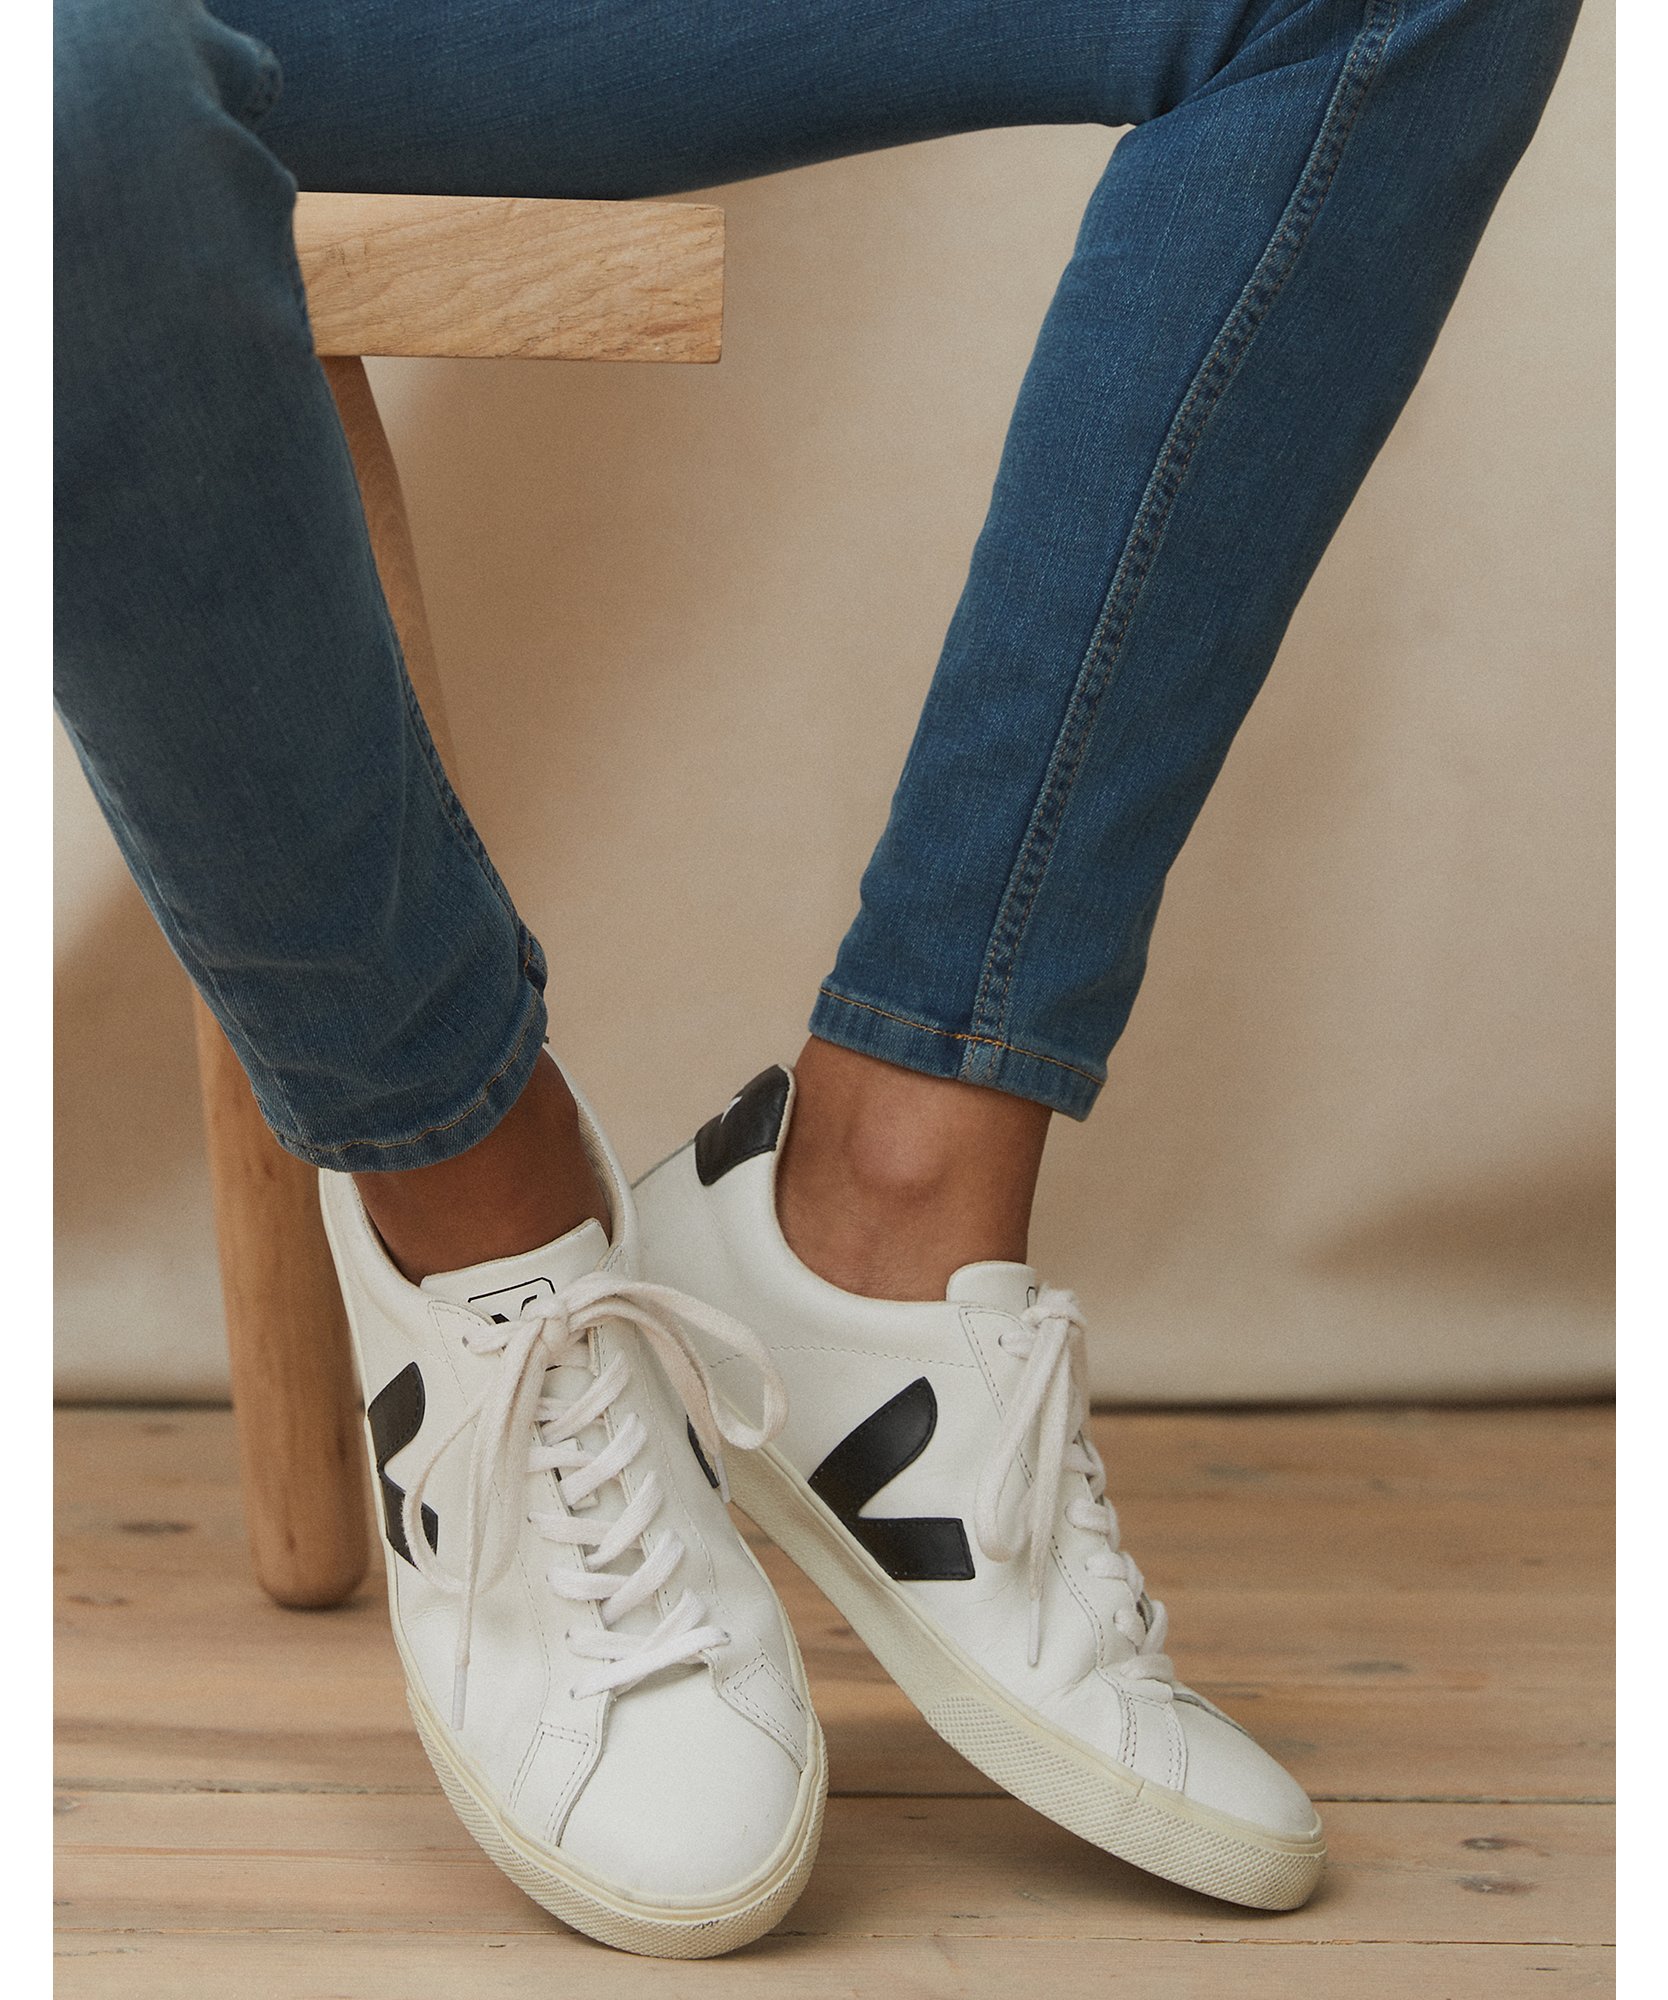 VEJA Esplar Leather Sneakers | View All Shoes & Accessories | The 